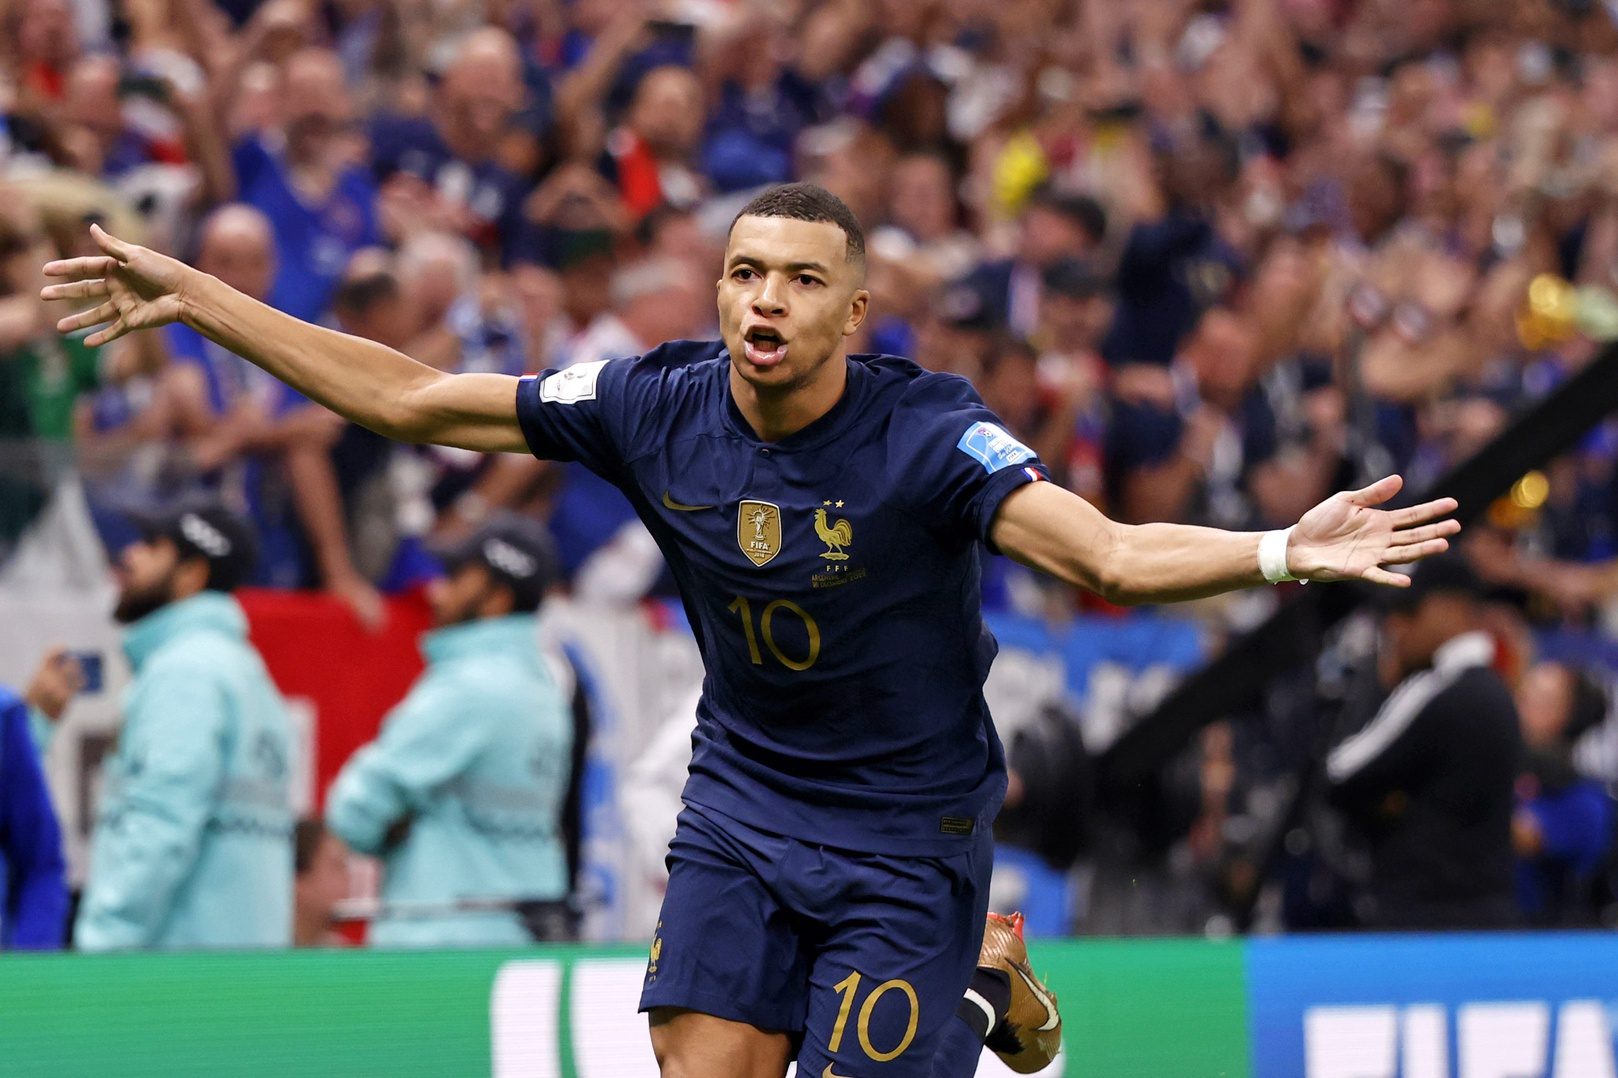 Kylian Mbappe playing for France at Qatar World Cup 2022